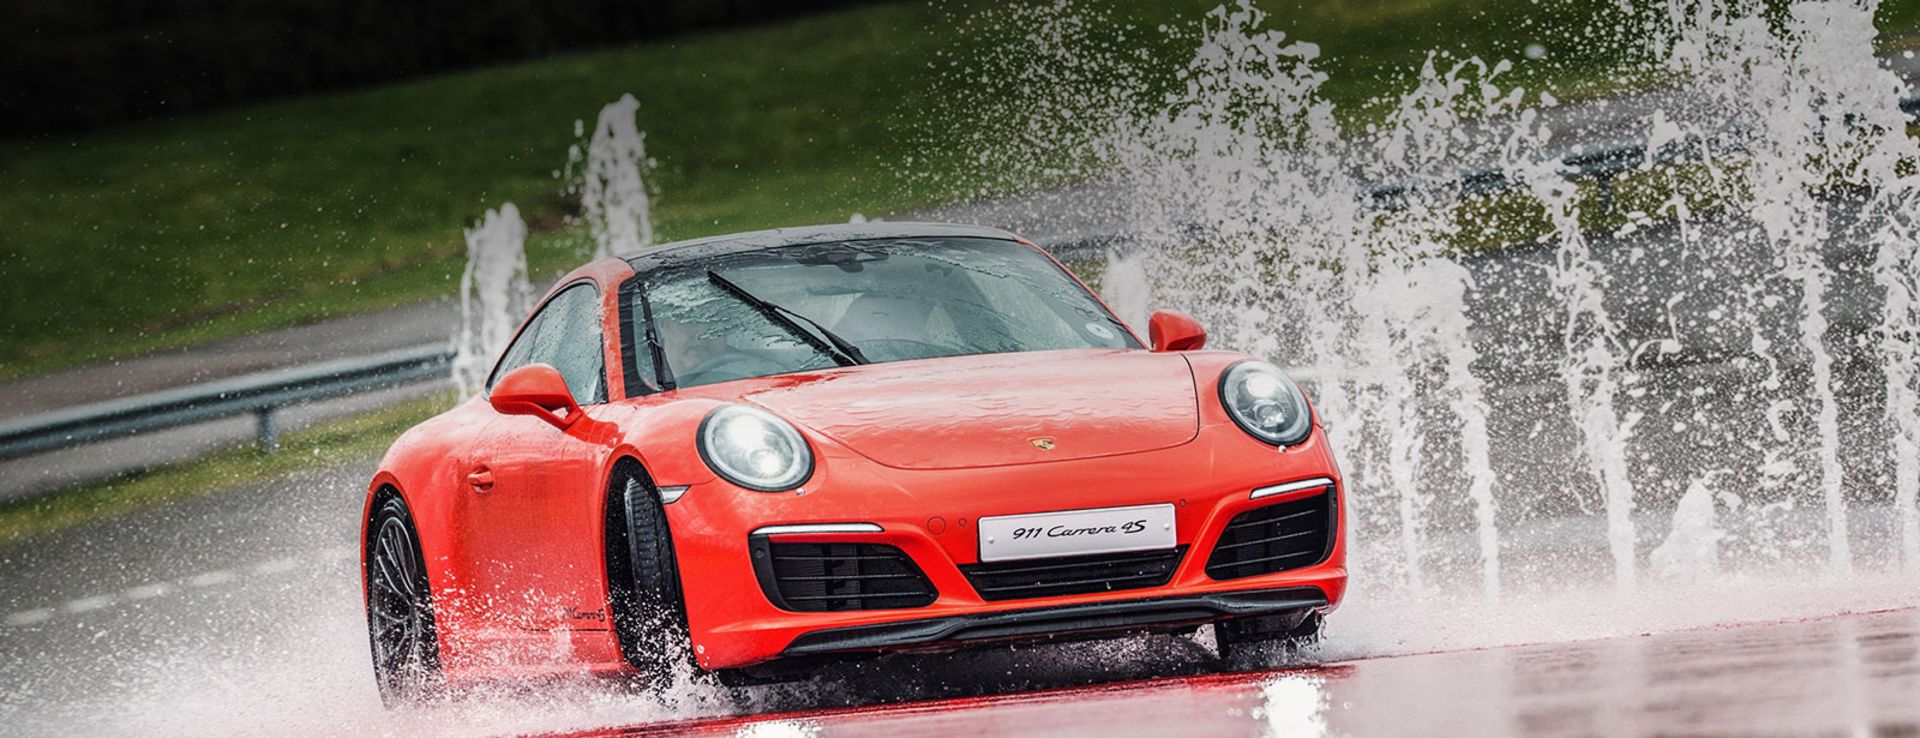 OFFICIAL PORSCHE SILVERSTONE DRIVING EXPERIENCE WITH LUNCH - DECEMBER 23 BOOKING - NO VAT! - Image 4 of 4